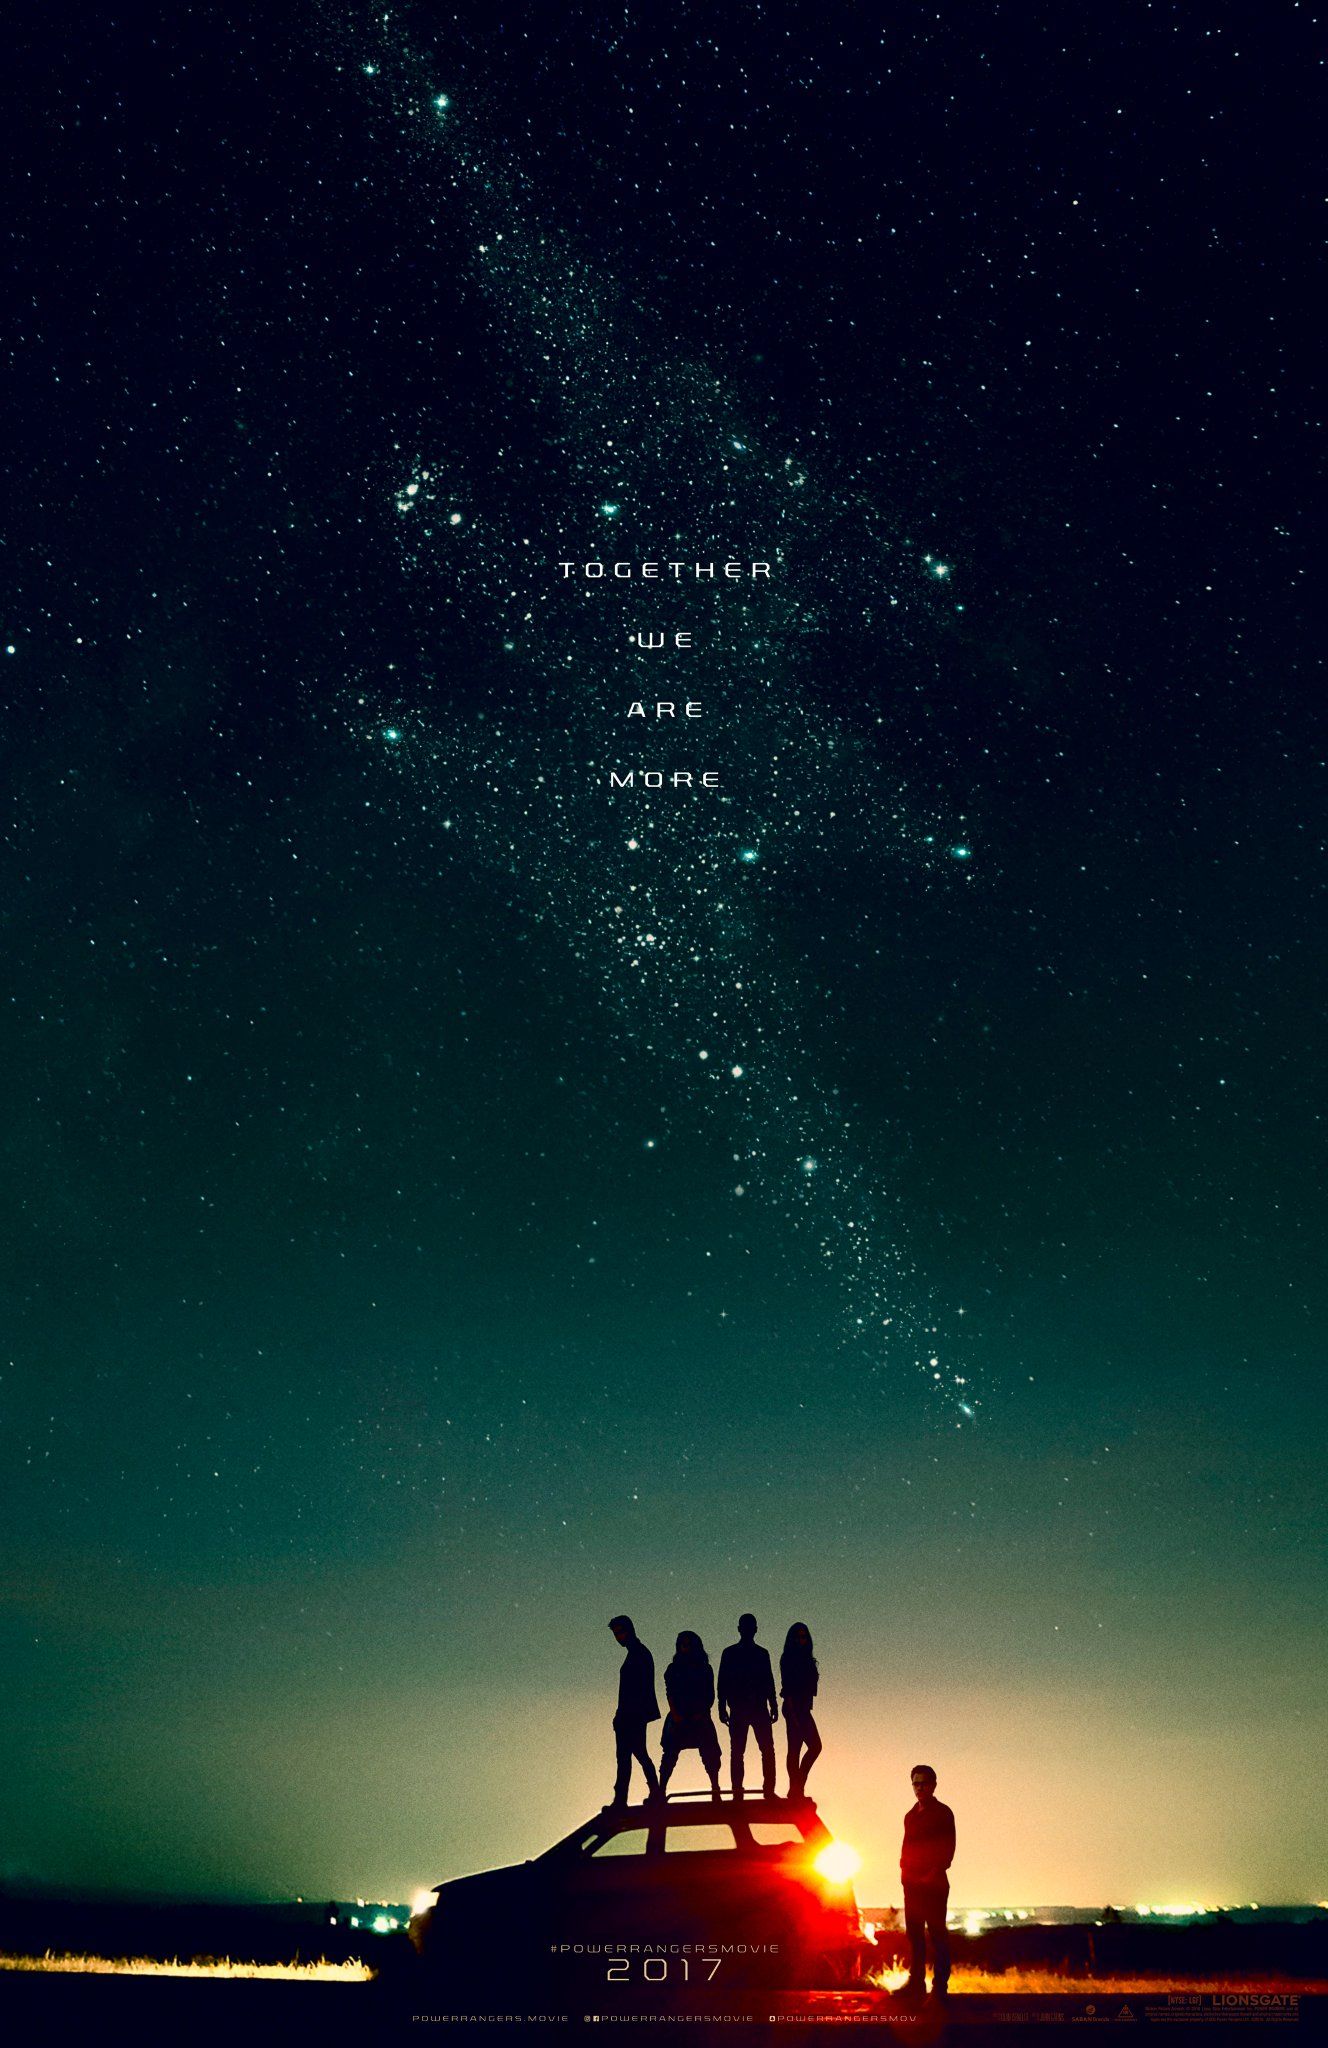 Power Rangers Teaser Poster: Together We Are More